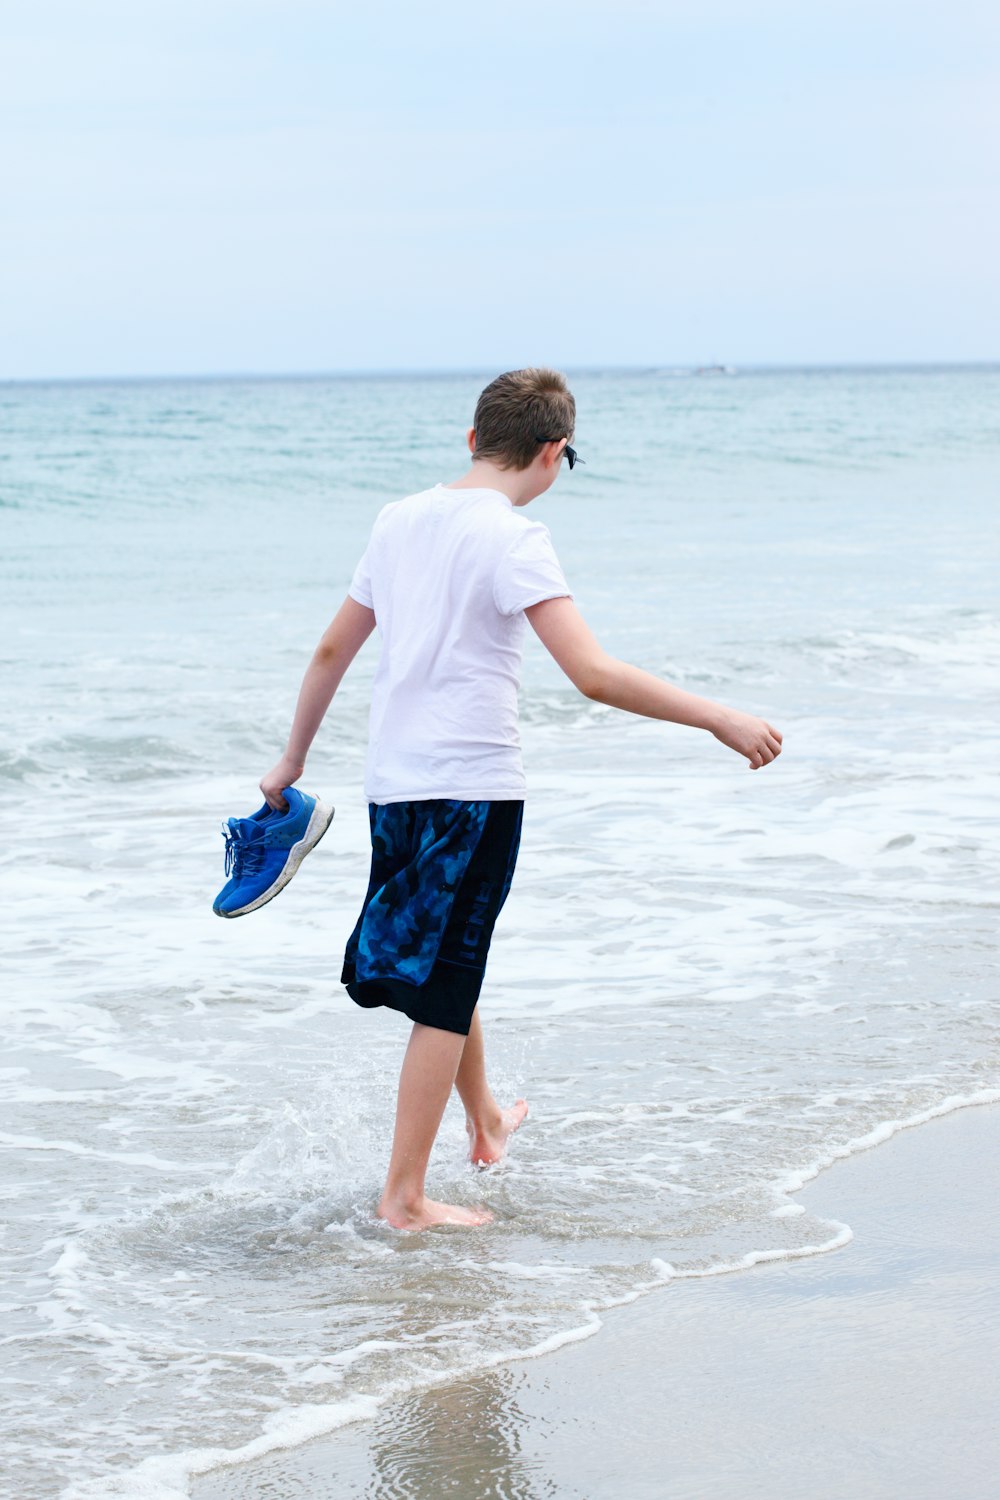 boy in white t-shirt and blue shorts running on beach during daytime